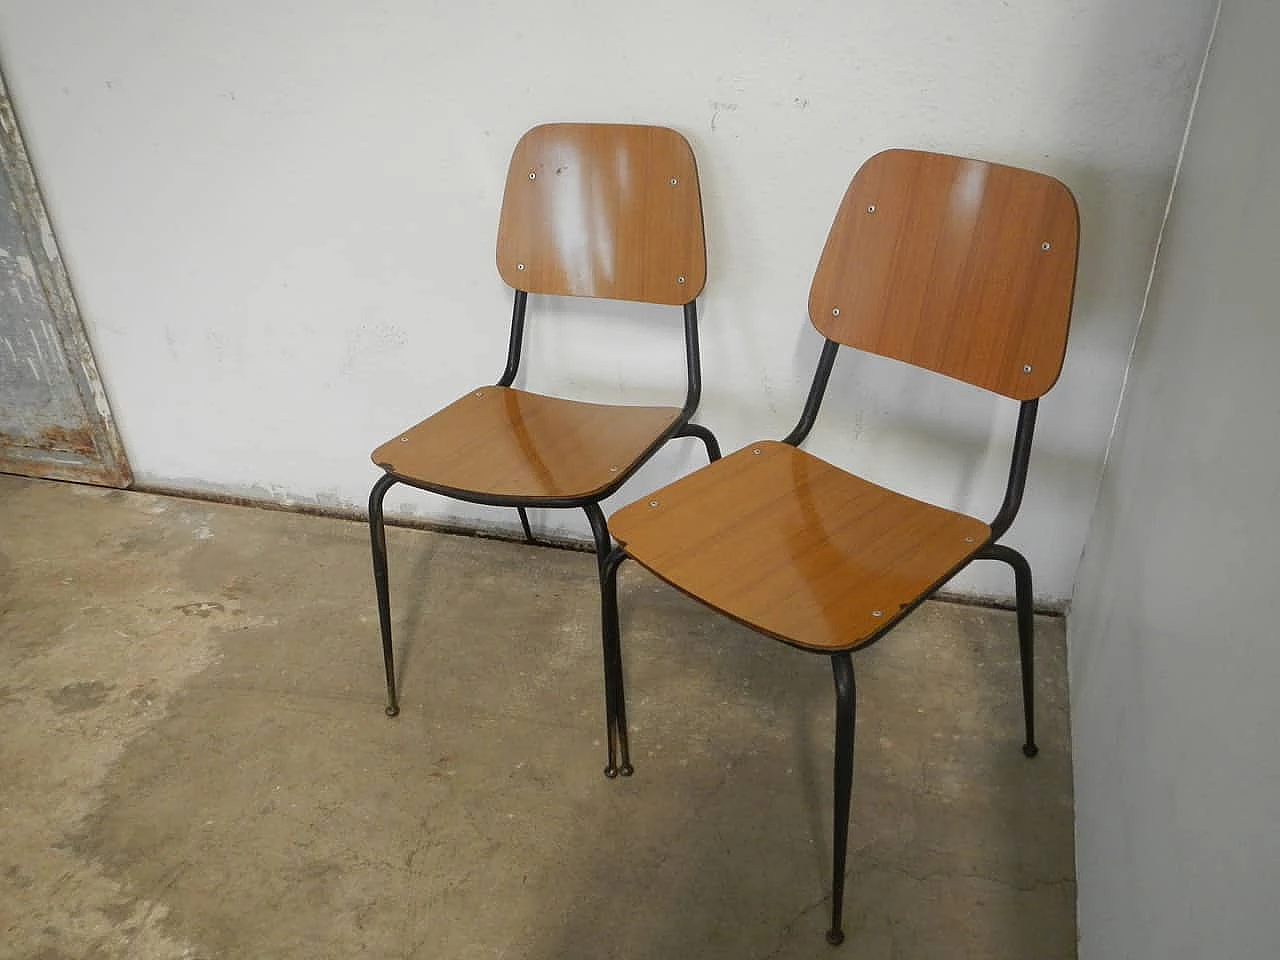 Pair of laminated chairs, 1950s 1062099